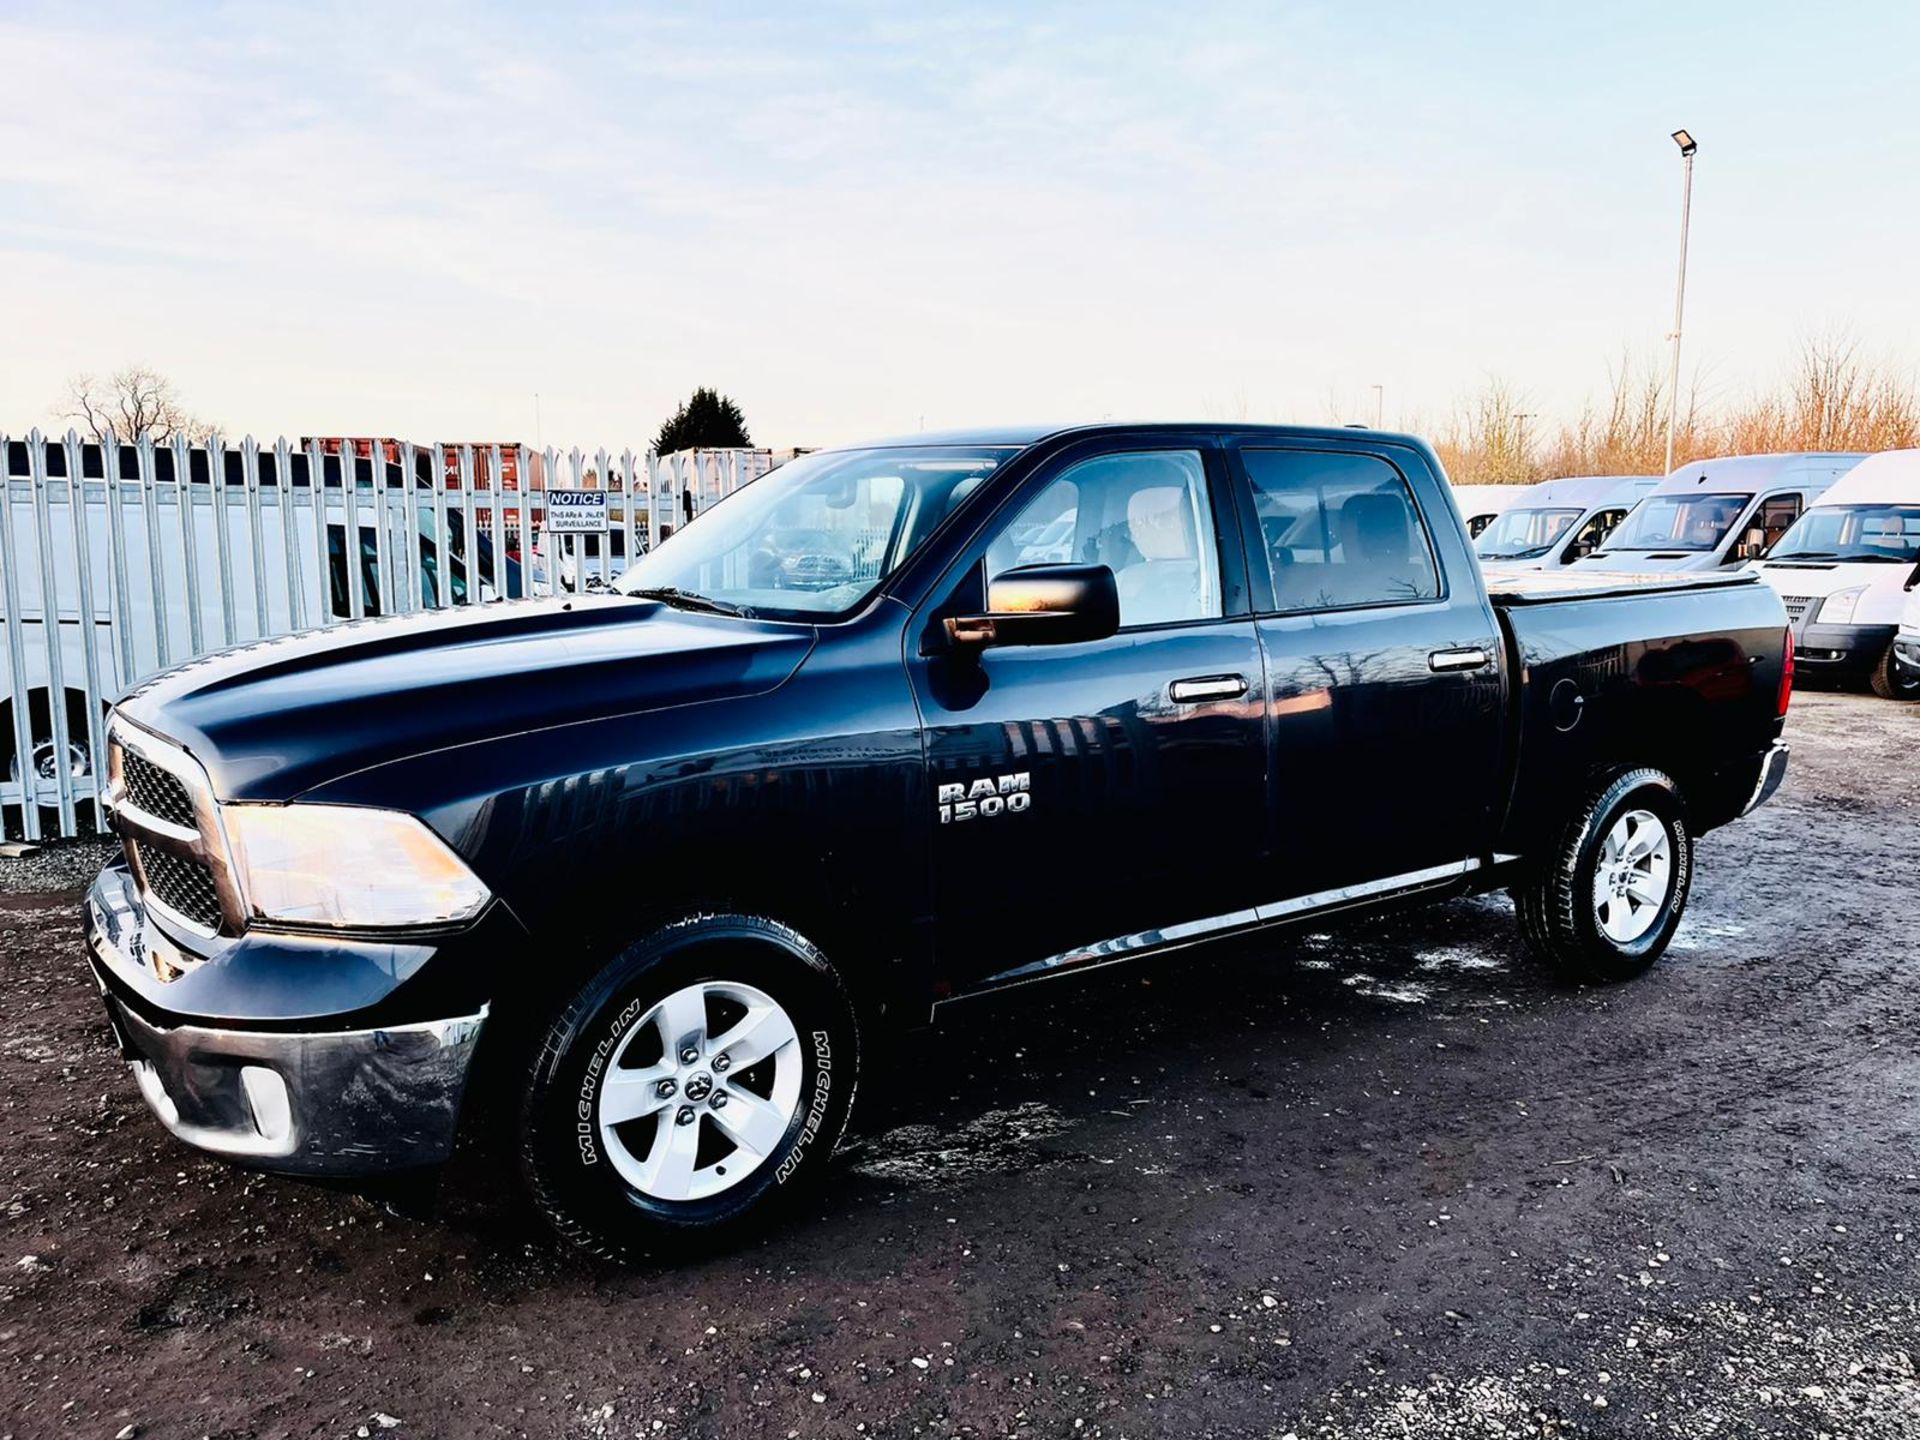 ** ON SALE ** Dodge Ram 3.6L V6 1500 Crew Cab SLT ' 2015 Year ' A/C - 6 Seats - Chrome Package - Image 9 of 31